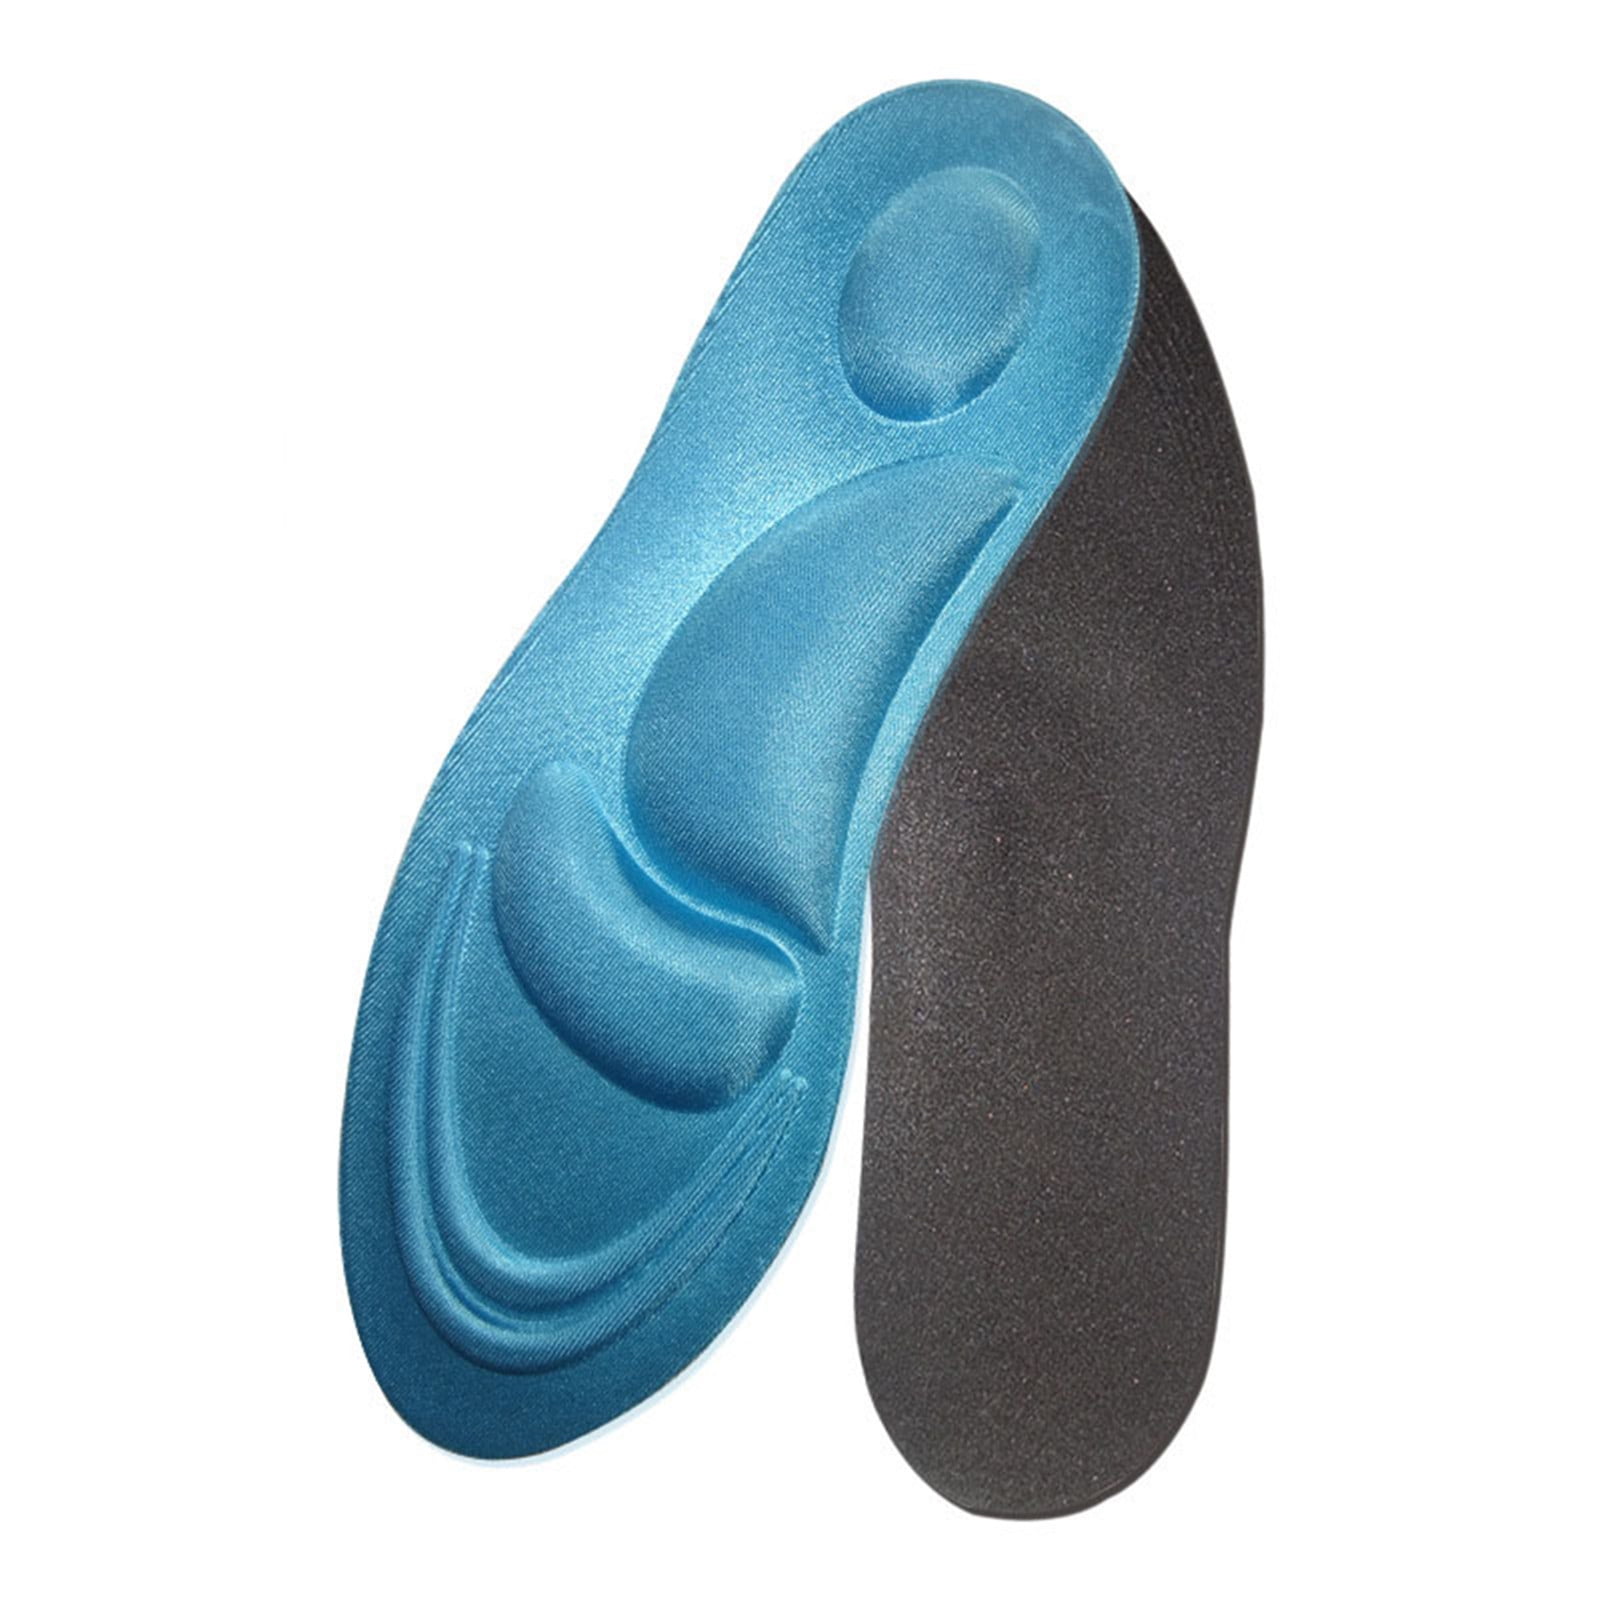 4D Sponge Soft Insole Comfort Shoe Pad Pain Relief Insert Cushion Foot Care Gift